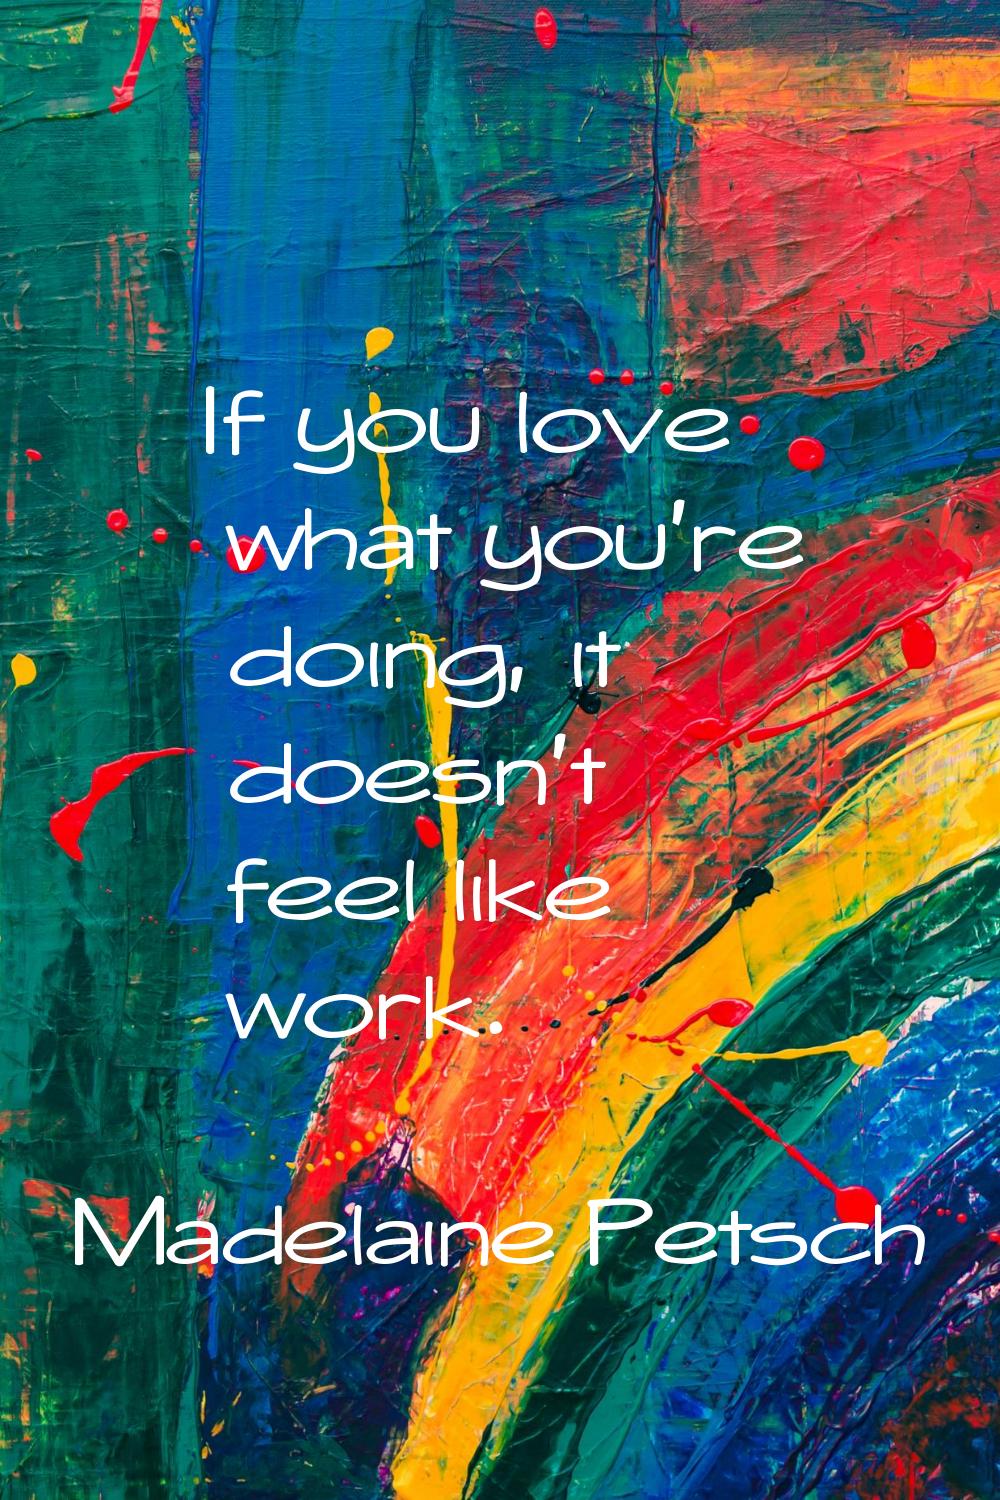 If you love what you're doing, it doesn't feel like work.